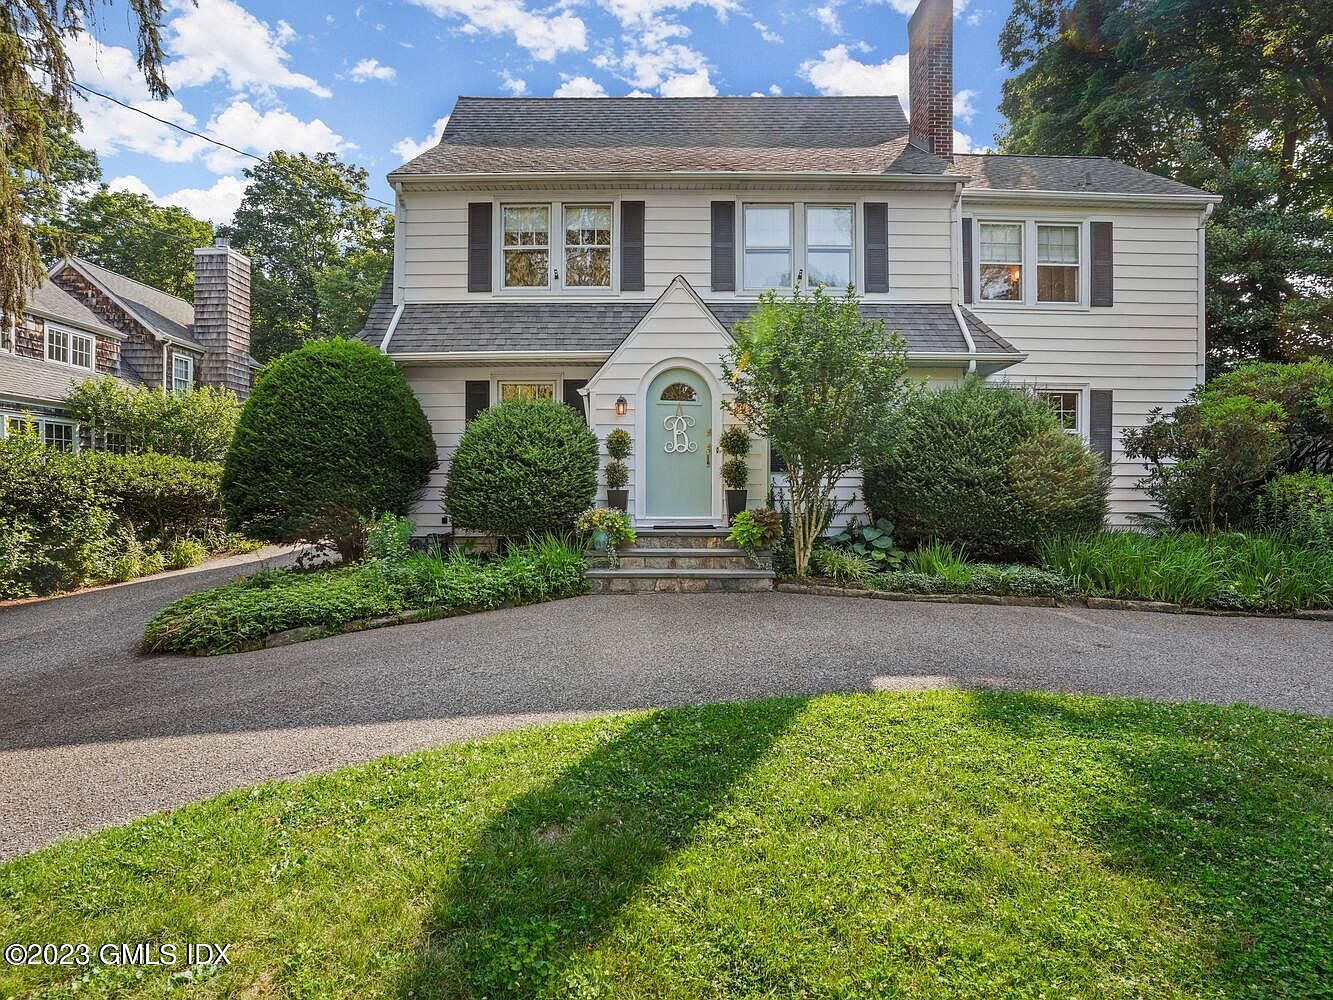 Image of 8 Oval Ave, Riverside, CT driveway